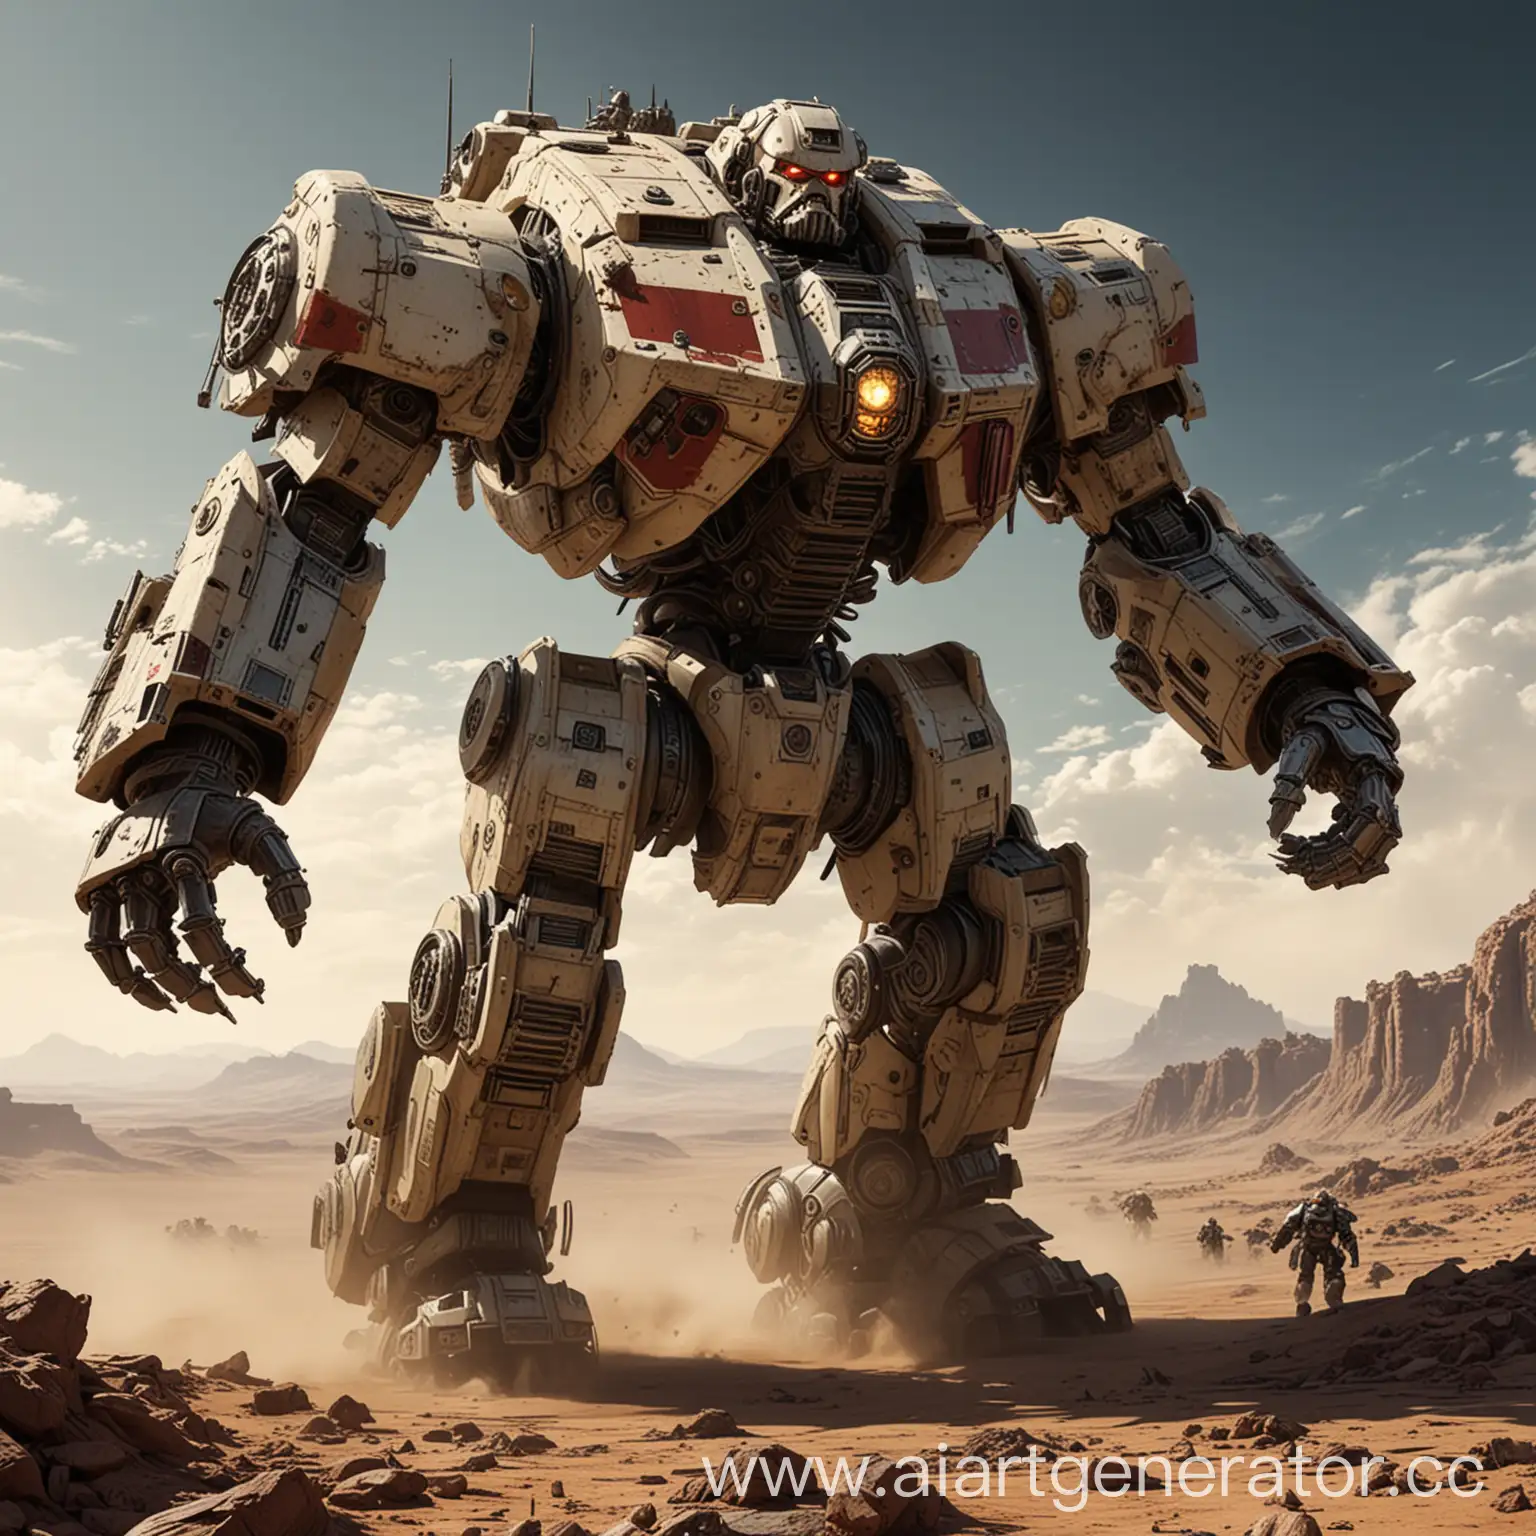 The massive Imperial Titan Robot (Warhammer 40000) is walking across the planet's surface during war. The weather is sunny, clear. The planet's surface is lifeless.